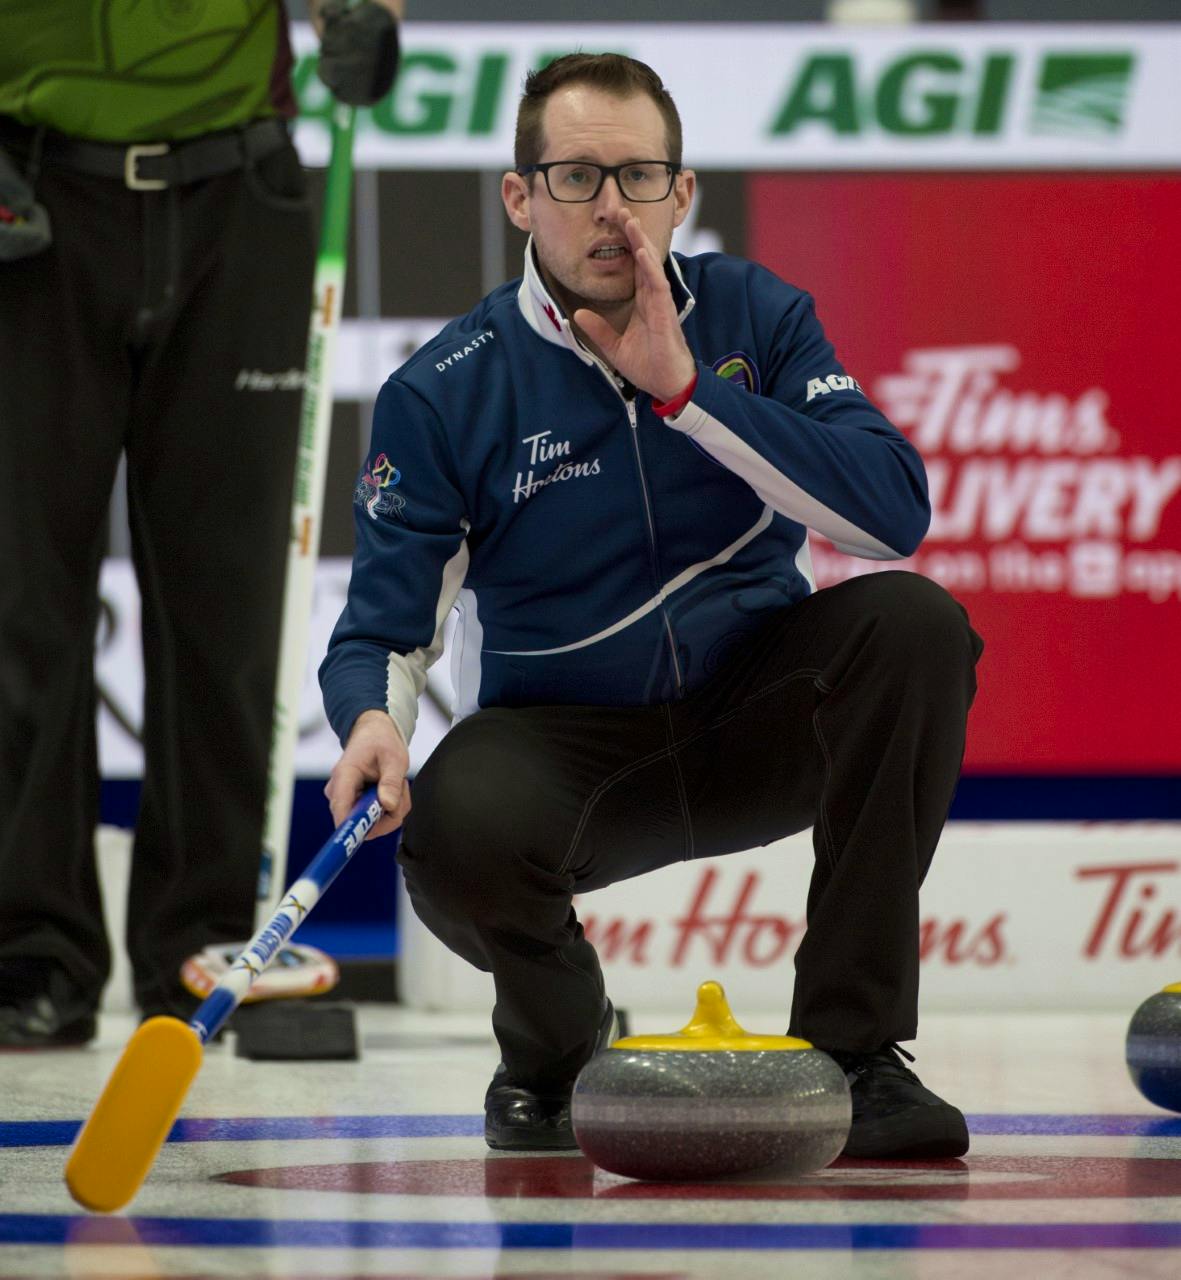 Ontario’s Scott McDonald, who has joined the Nova Scotia rink as skip at the Tim Hortons Brier in Calgary, yells instruction to his team during Draw 3 play Saturday. Nova Scotia defeated P.E.I. 11-4 to even its record at 1-1. - Michael Burns / Curling Canada